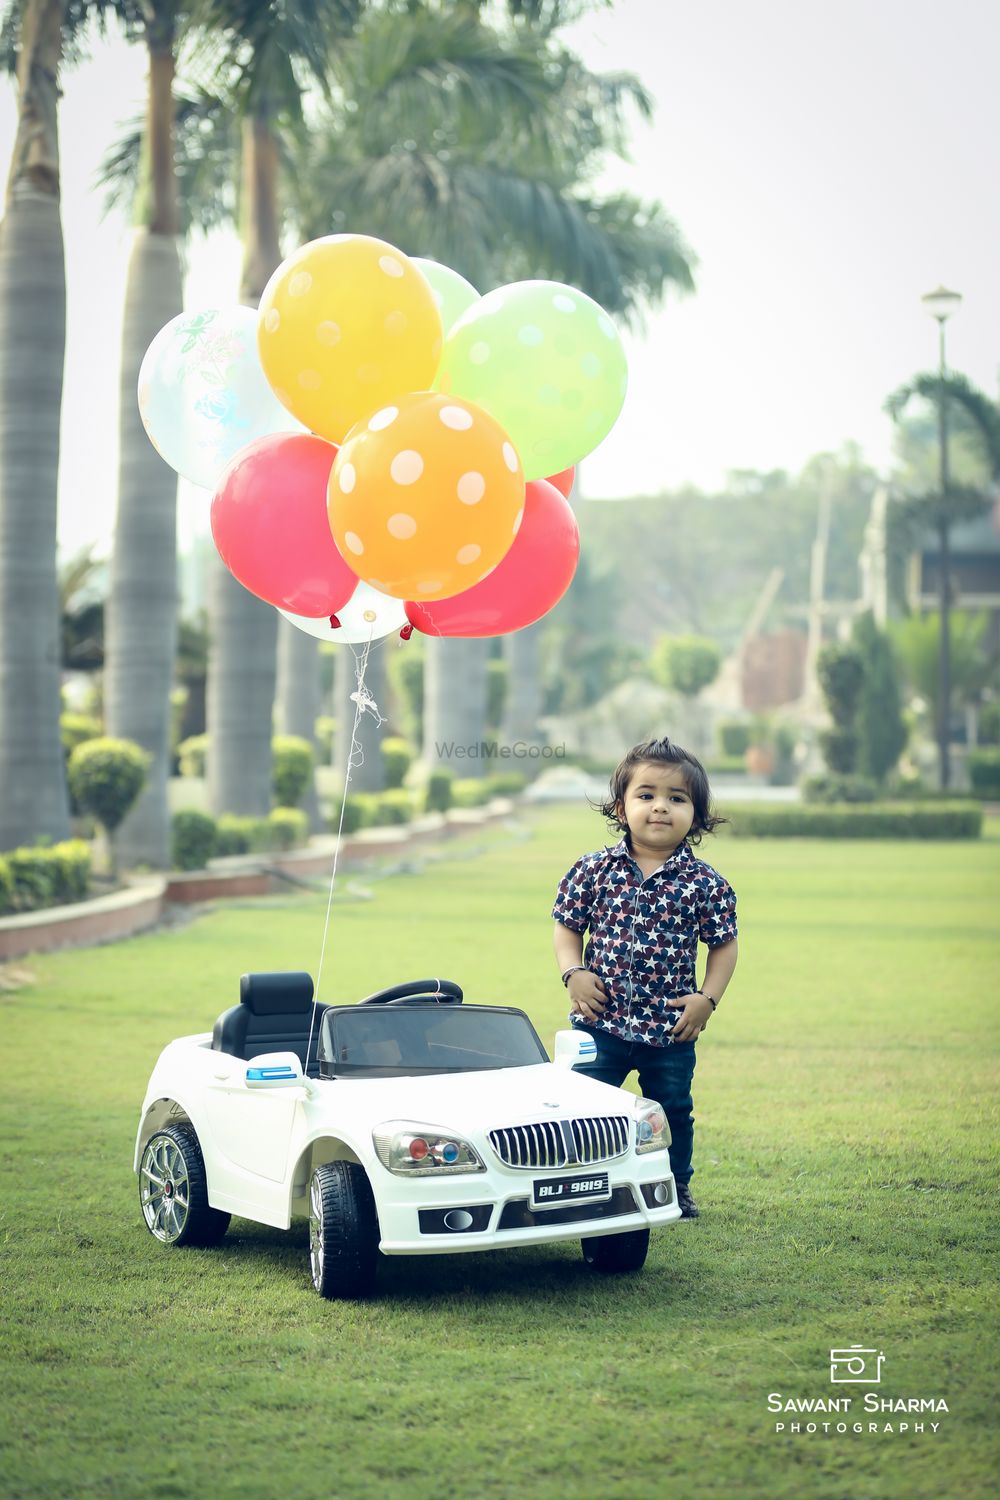 Photo From Baby shoots - By Sawant Sharma Photography